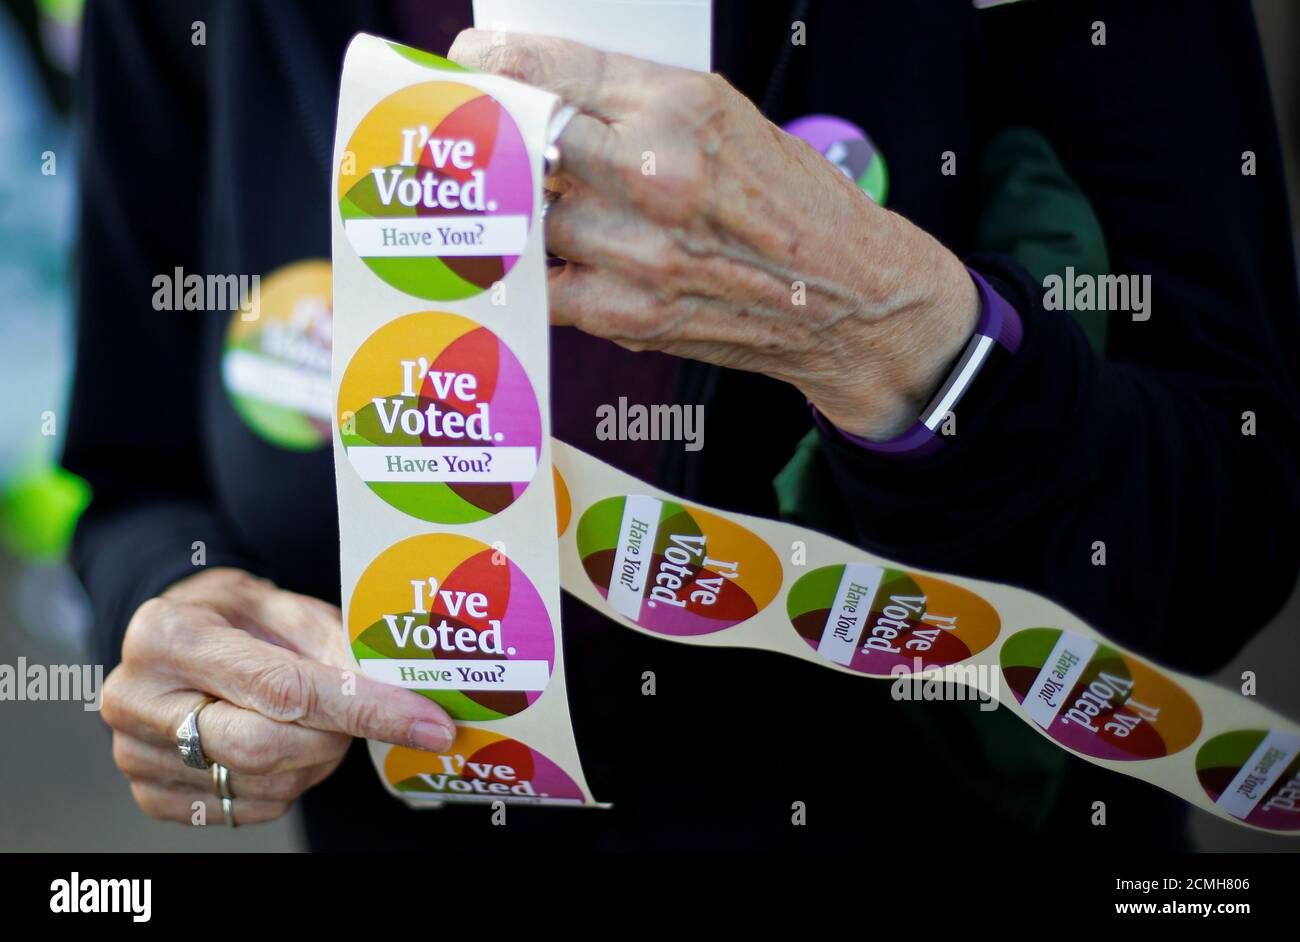 A woman holds stickers as Ireland holds a referendum on iberalising abortion laws, in Dublin, Ireland, May 25, 2018. REUTERS/Max Rossi Stock Photo